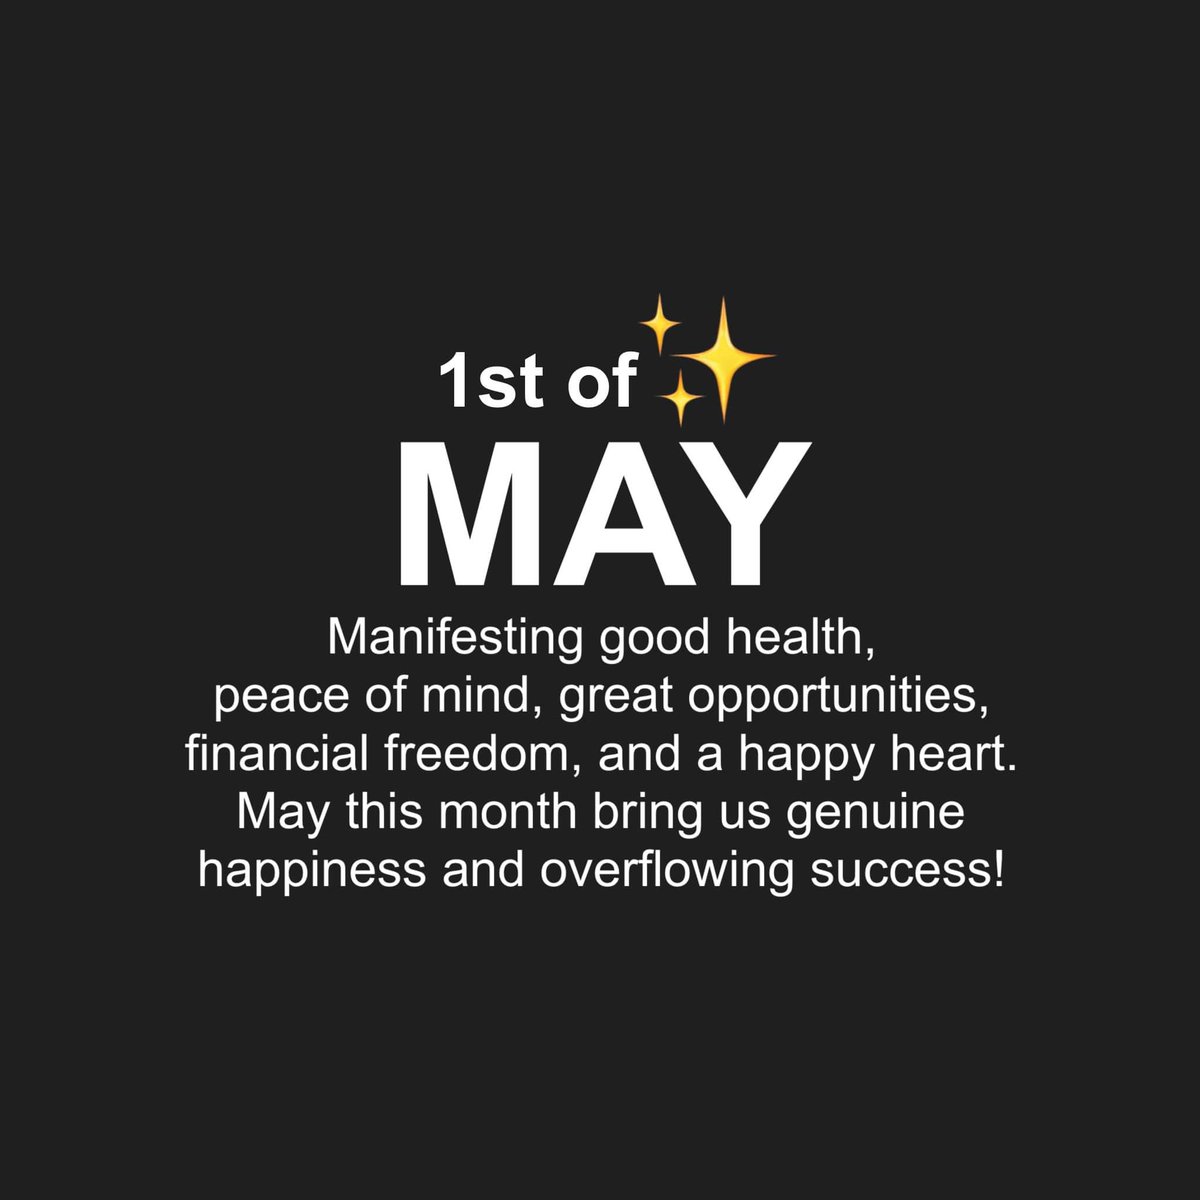 Hello, May! Today is the 1st day of May, may God grant your wishes and heart desires this new month and beyond.